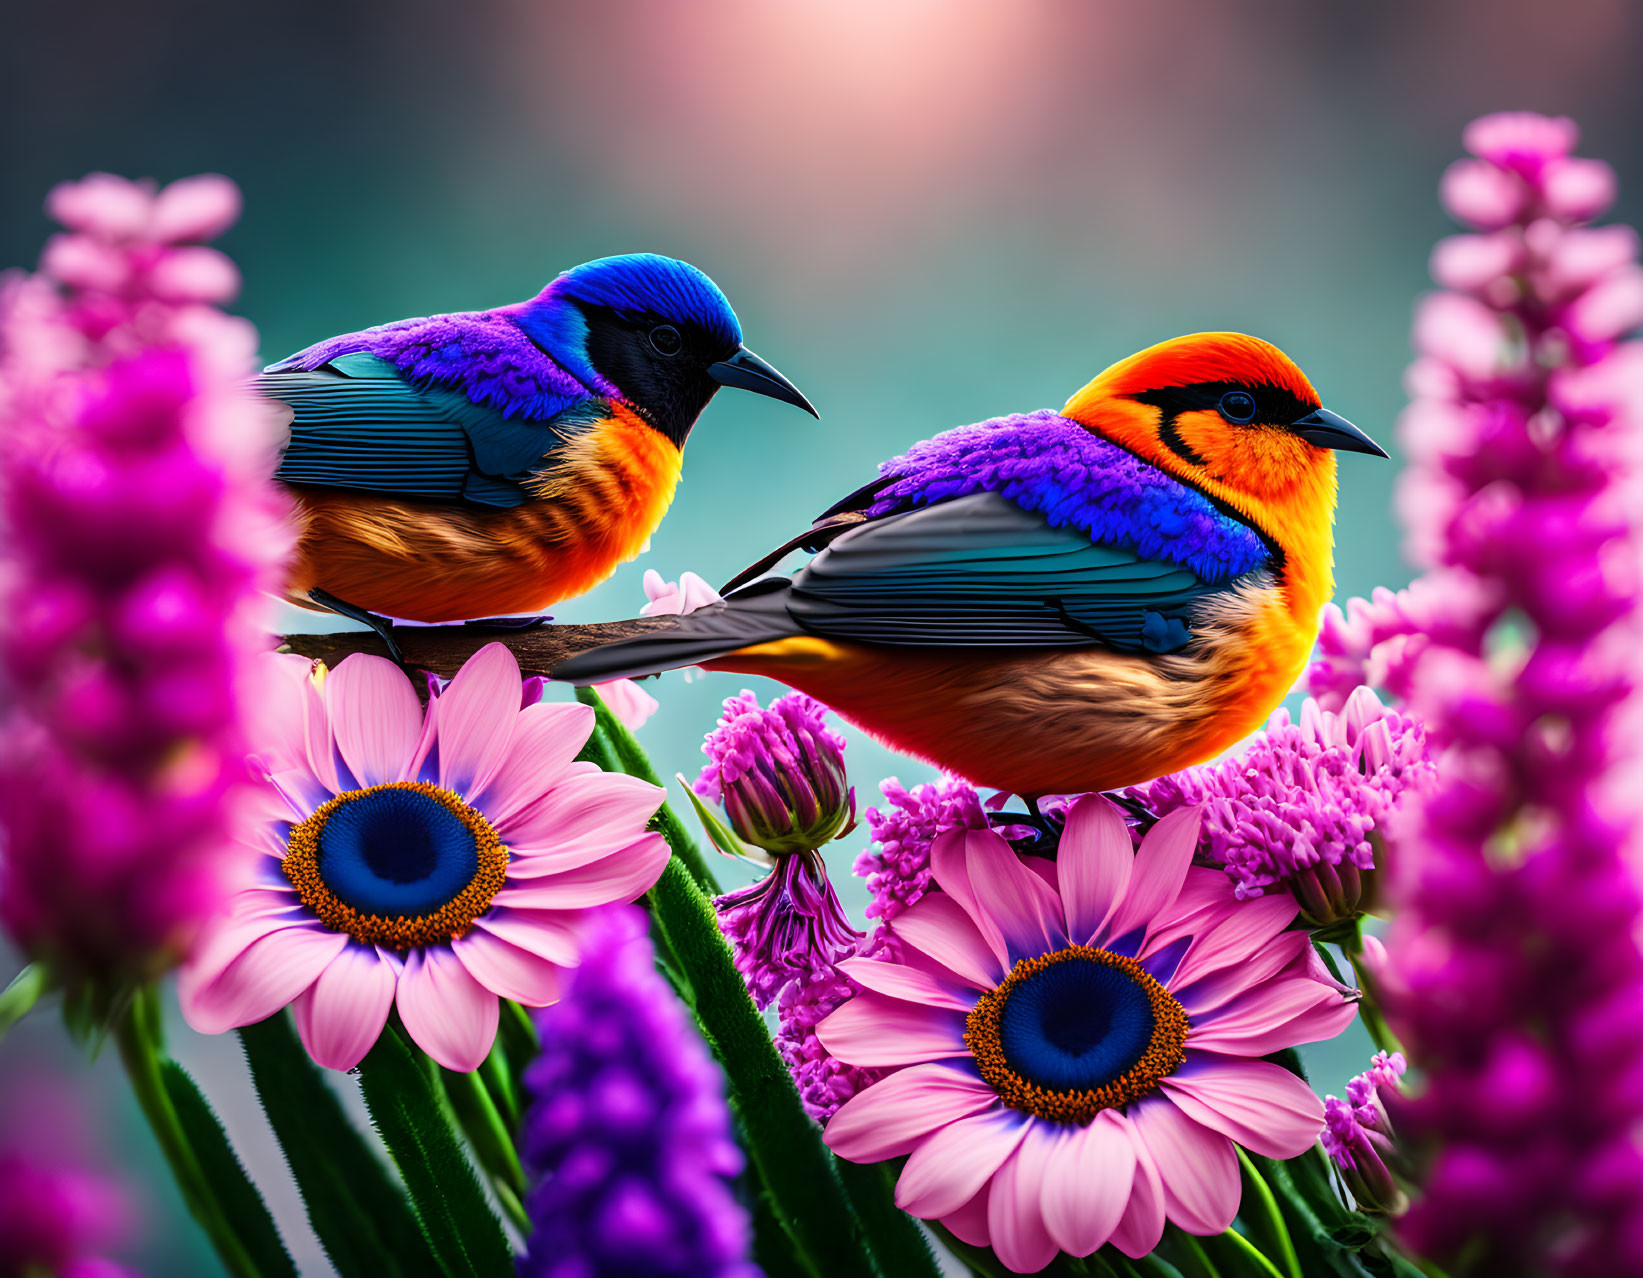 Colorful Birds Among Purple and Pink Flowers on Soft-Focus Background